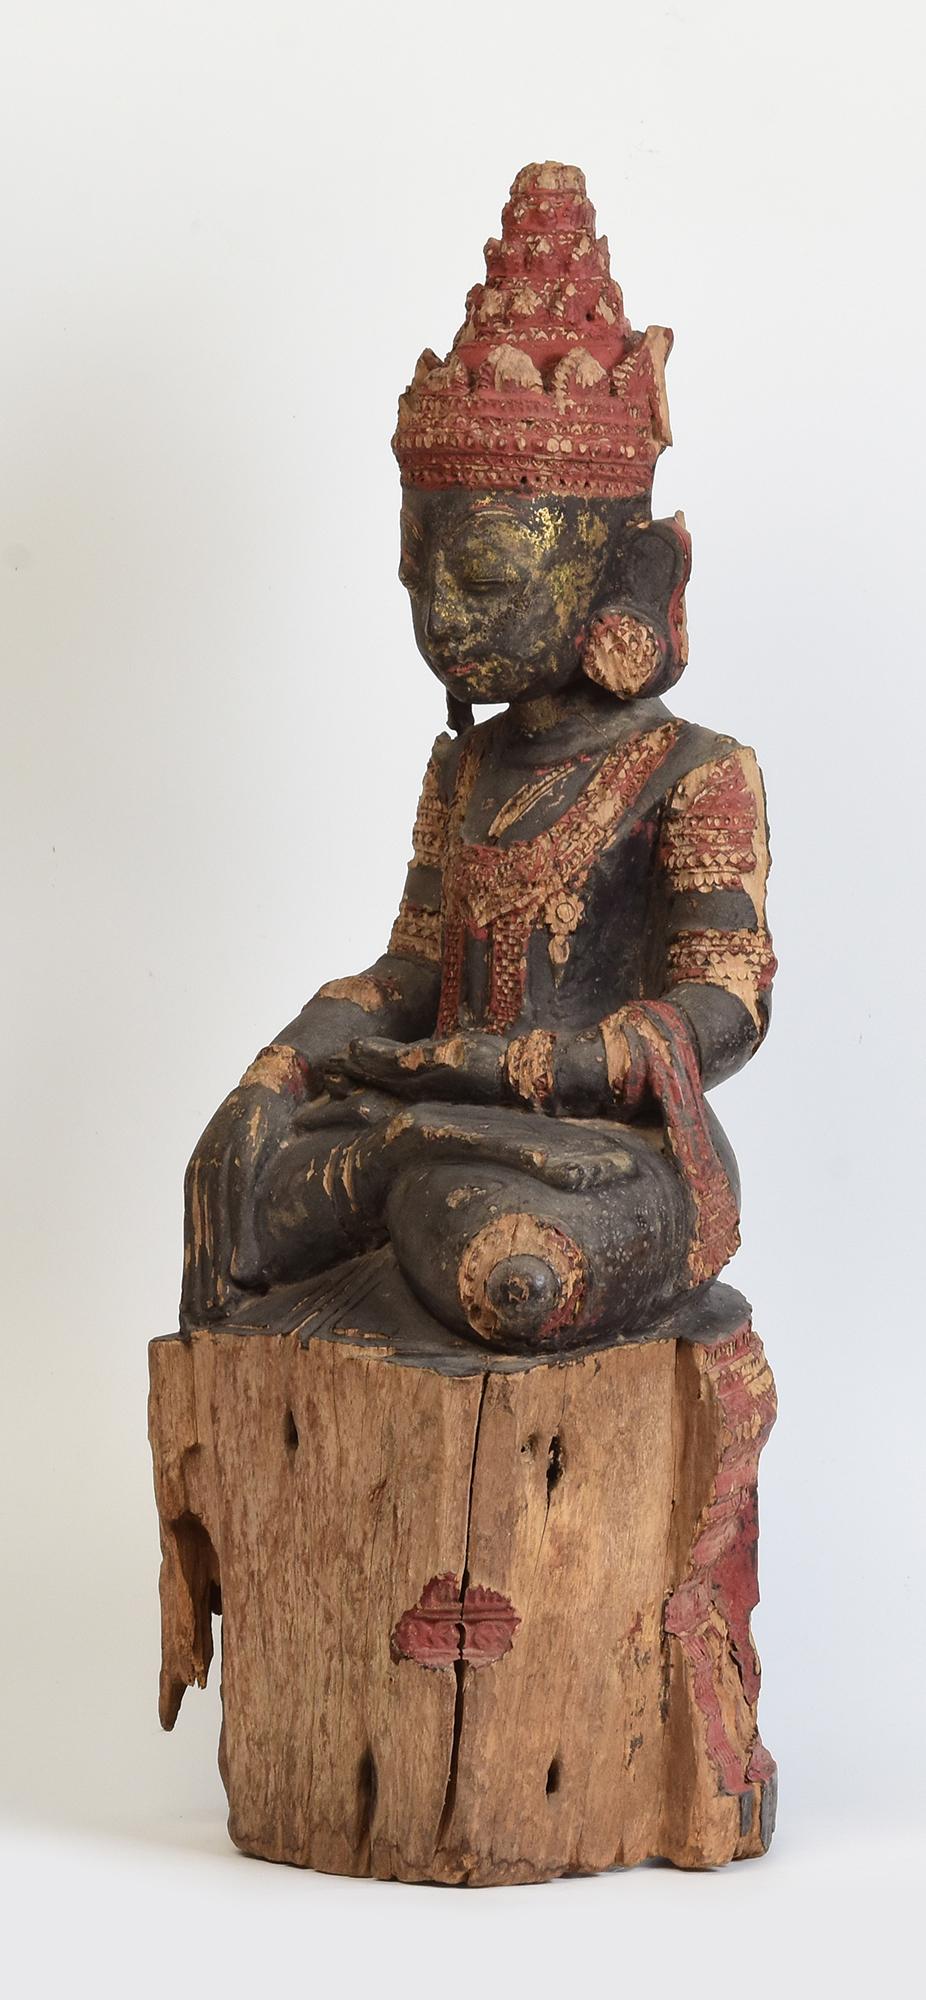 16th Century, Ava, Rare Antique Burmese Wooden Seated Crowned Buddha For Sale 2